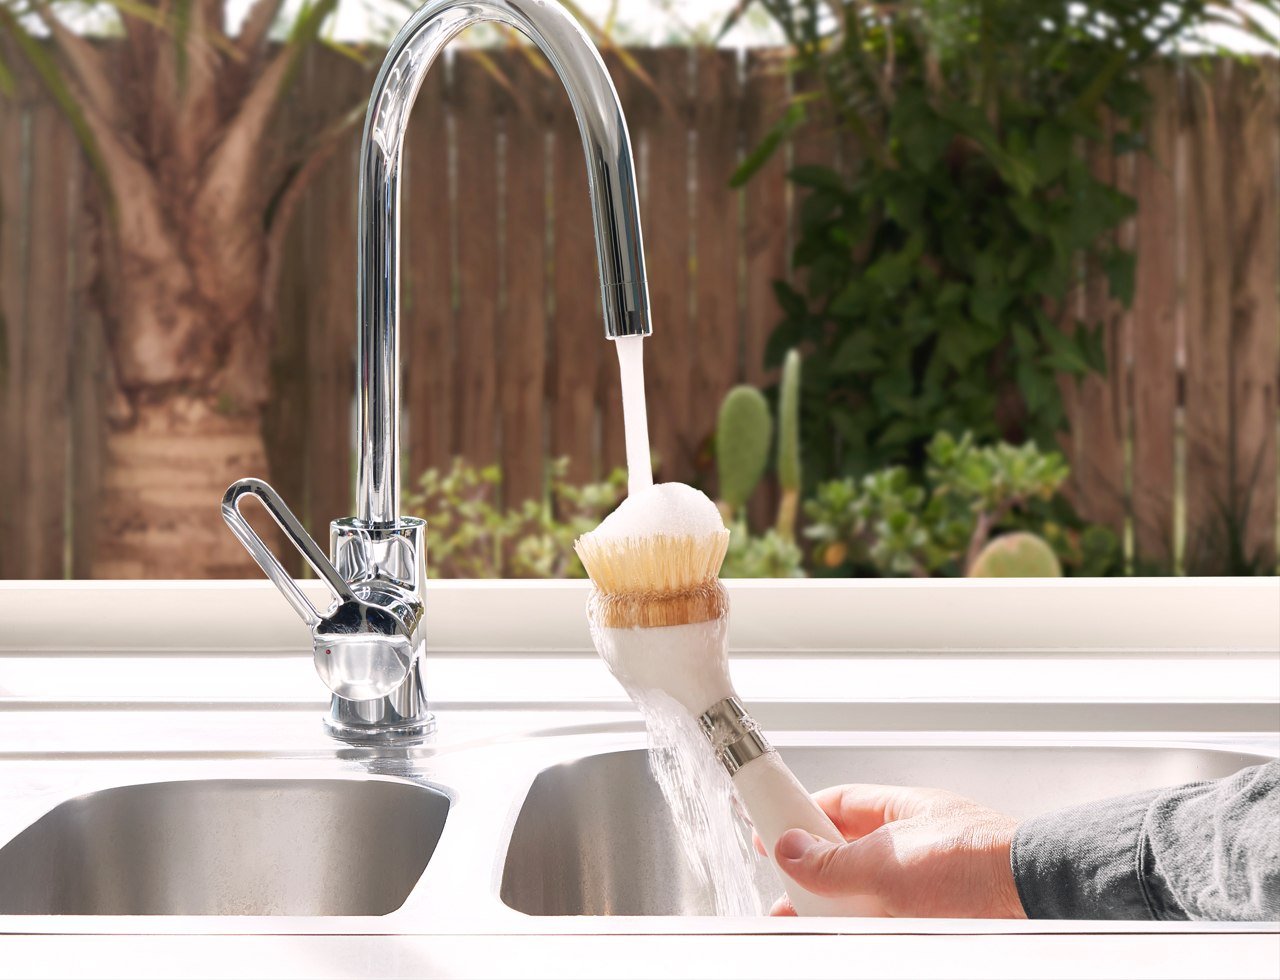 This sleek soap-dispensing dish brush could easily be the most beautiful  product in your entire kitchen - Yanko Design